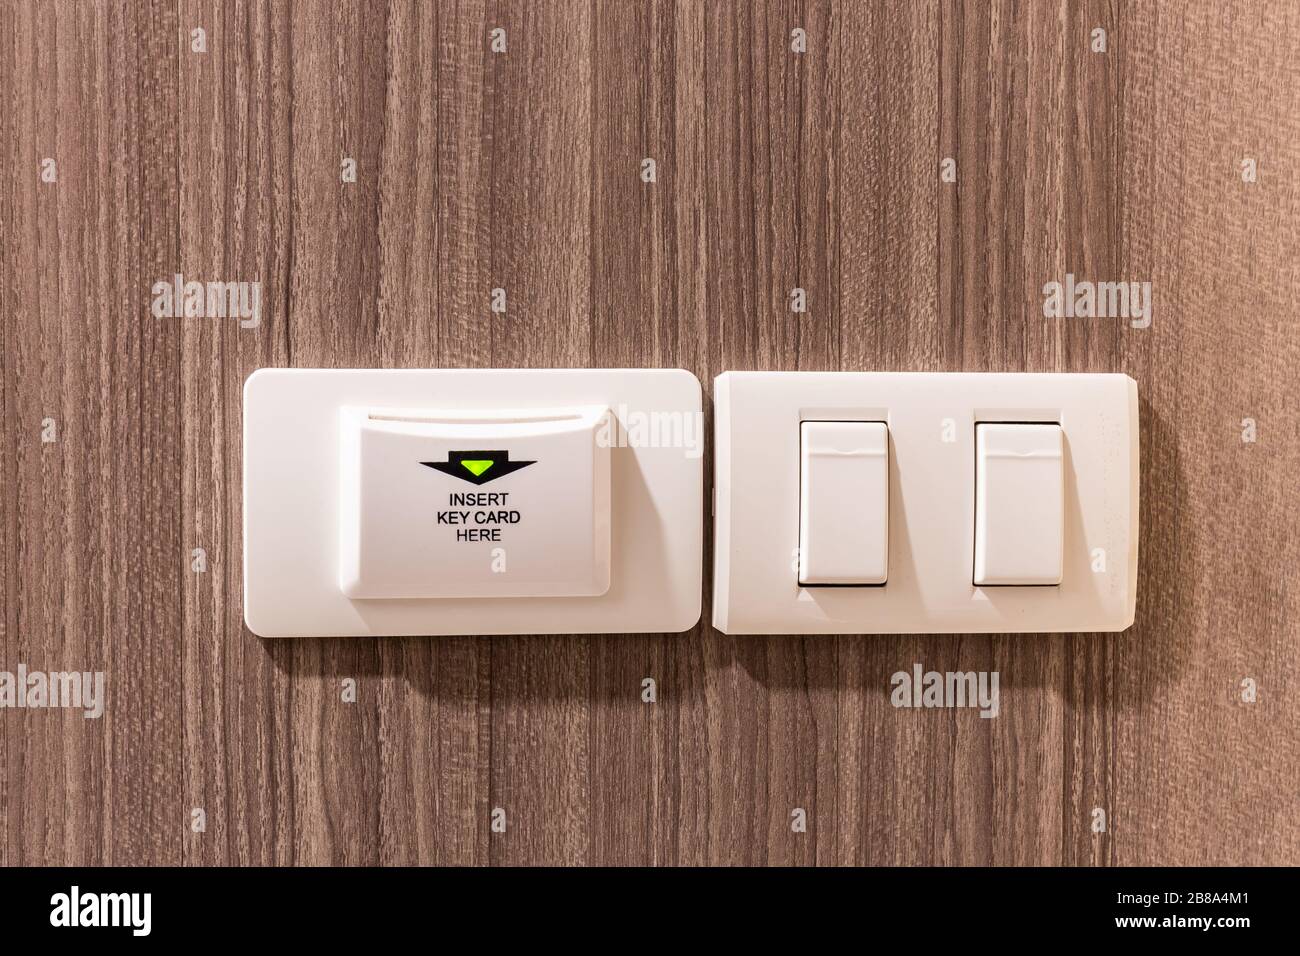 key card holder and light switches in hotel room for Control electrical  systems and room safety on wood wall Stock Photo - Alamy